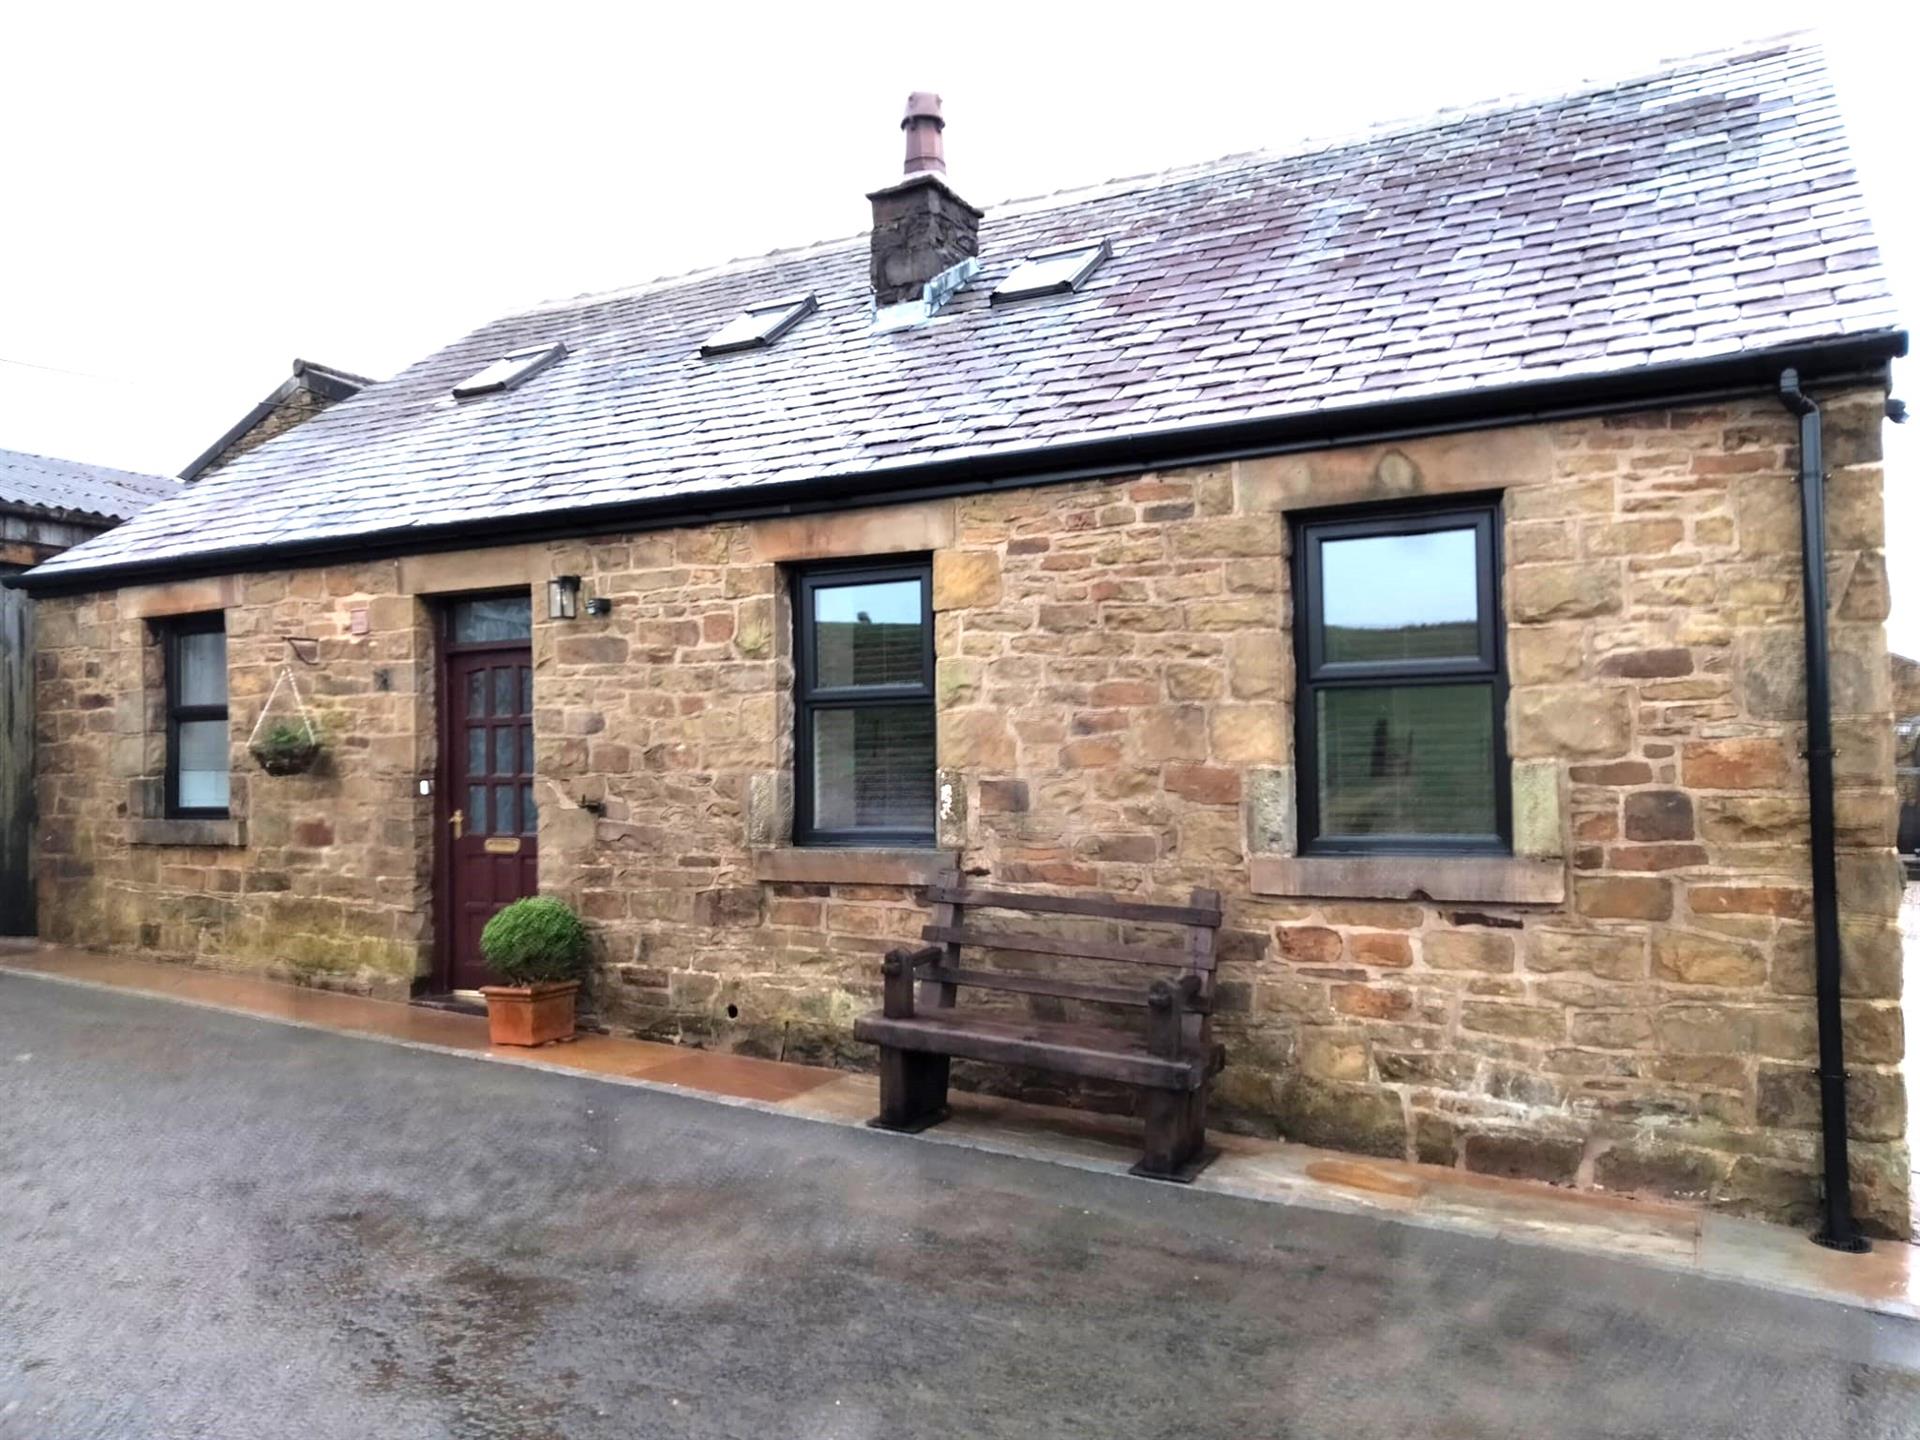 3 bedroom farm house character property To Let in Plantation Rd, Edgworth, Lancs - Main.